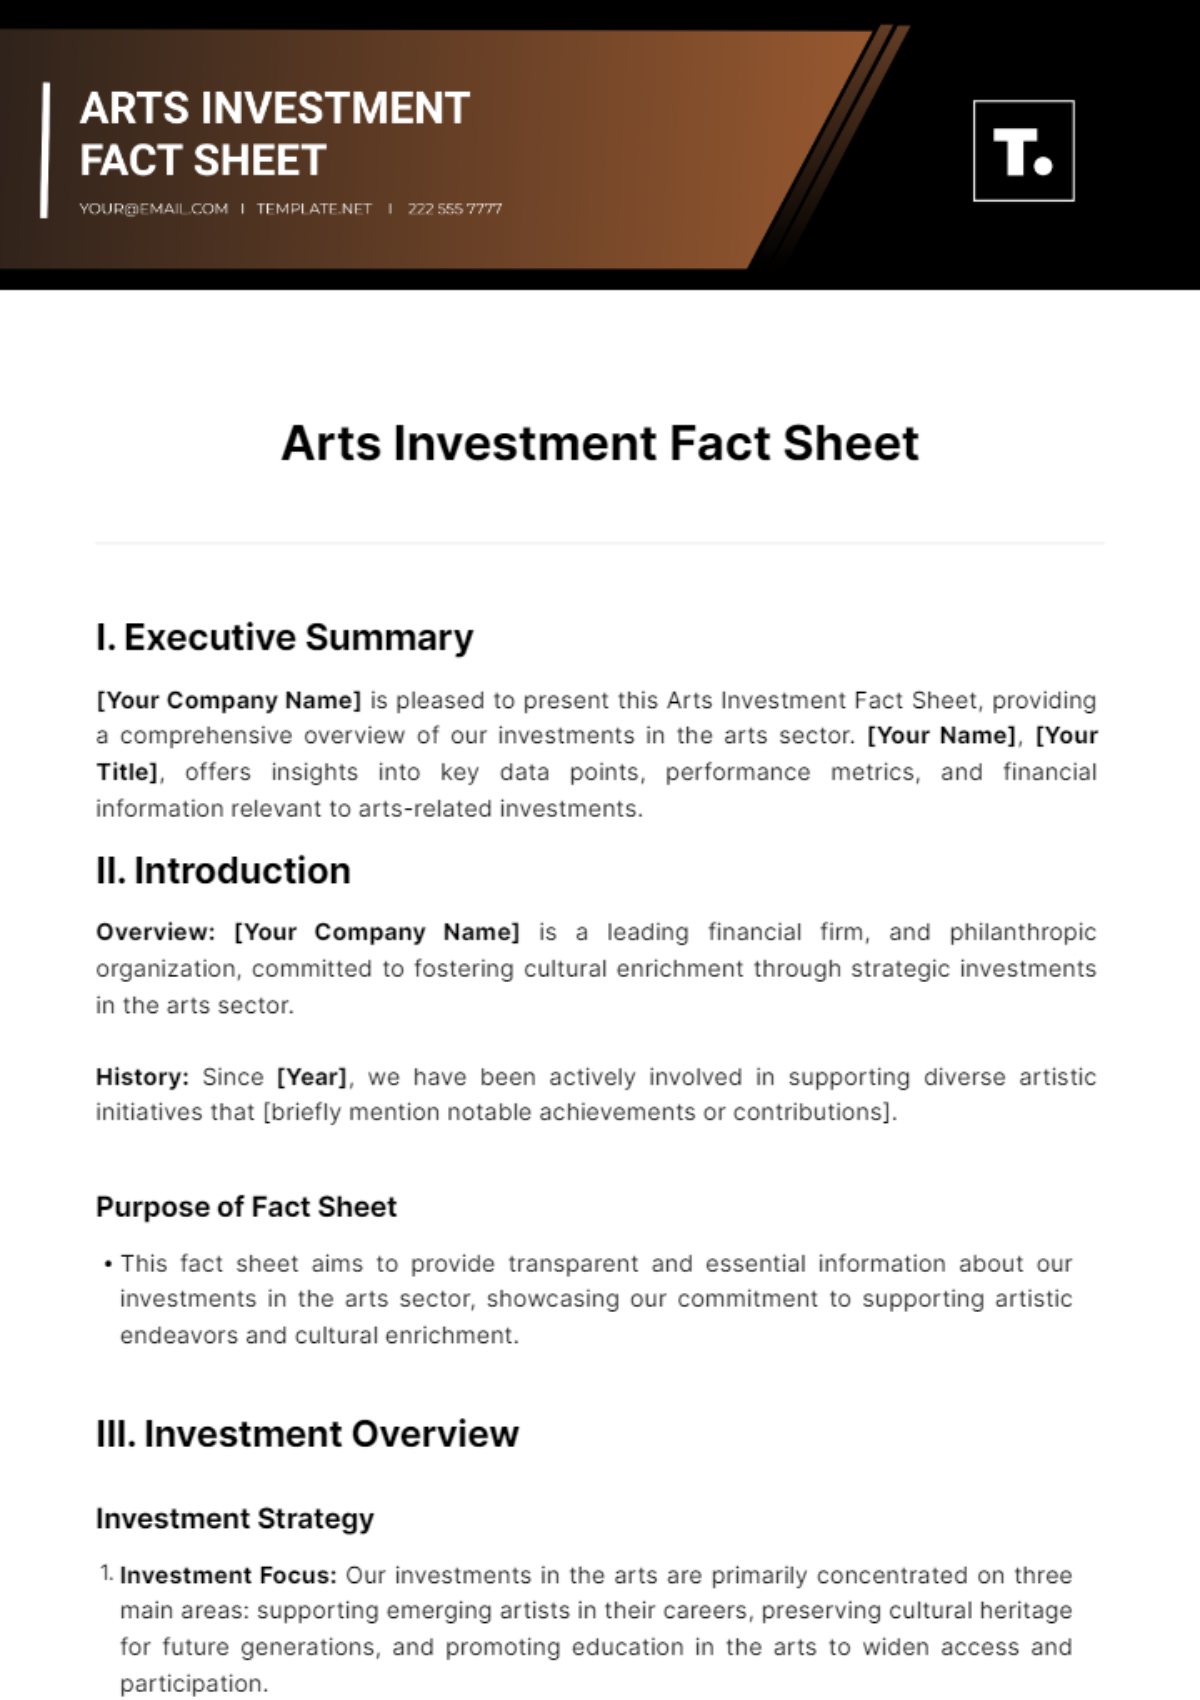 Free Arts Investment Fact Sheet Template